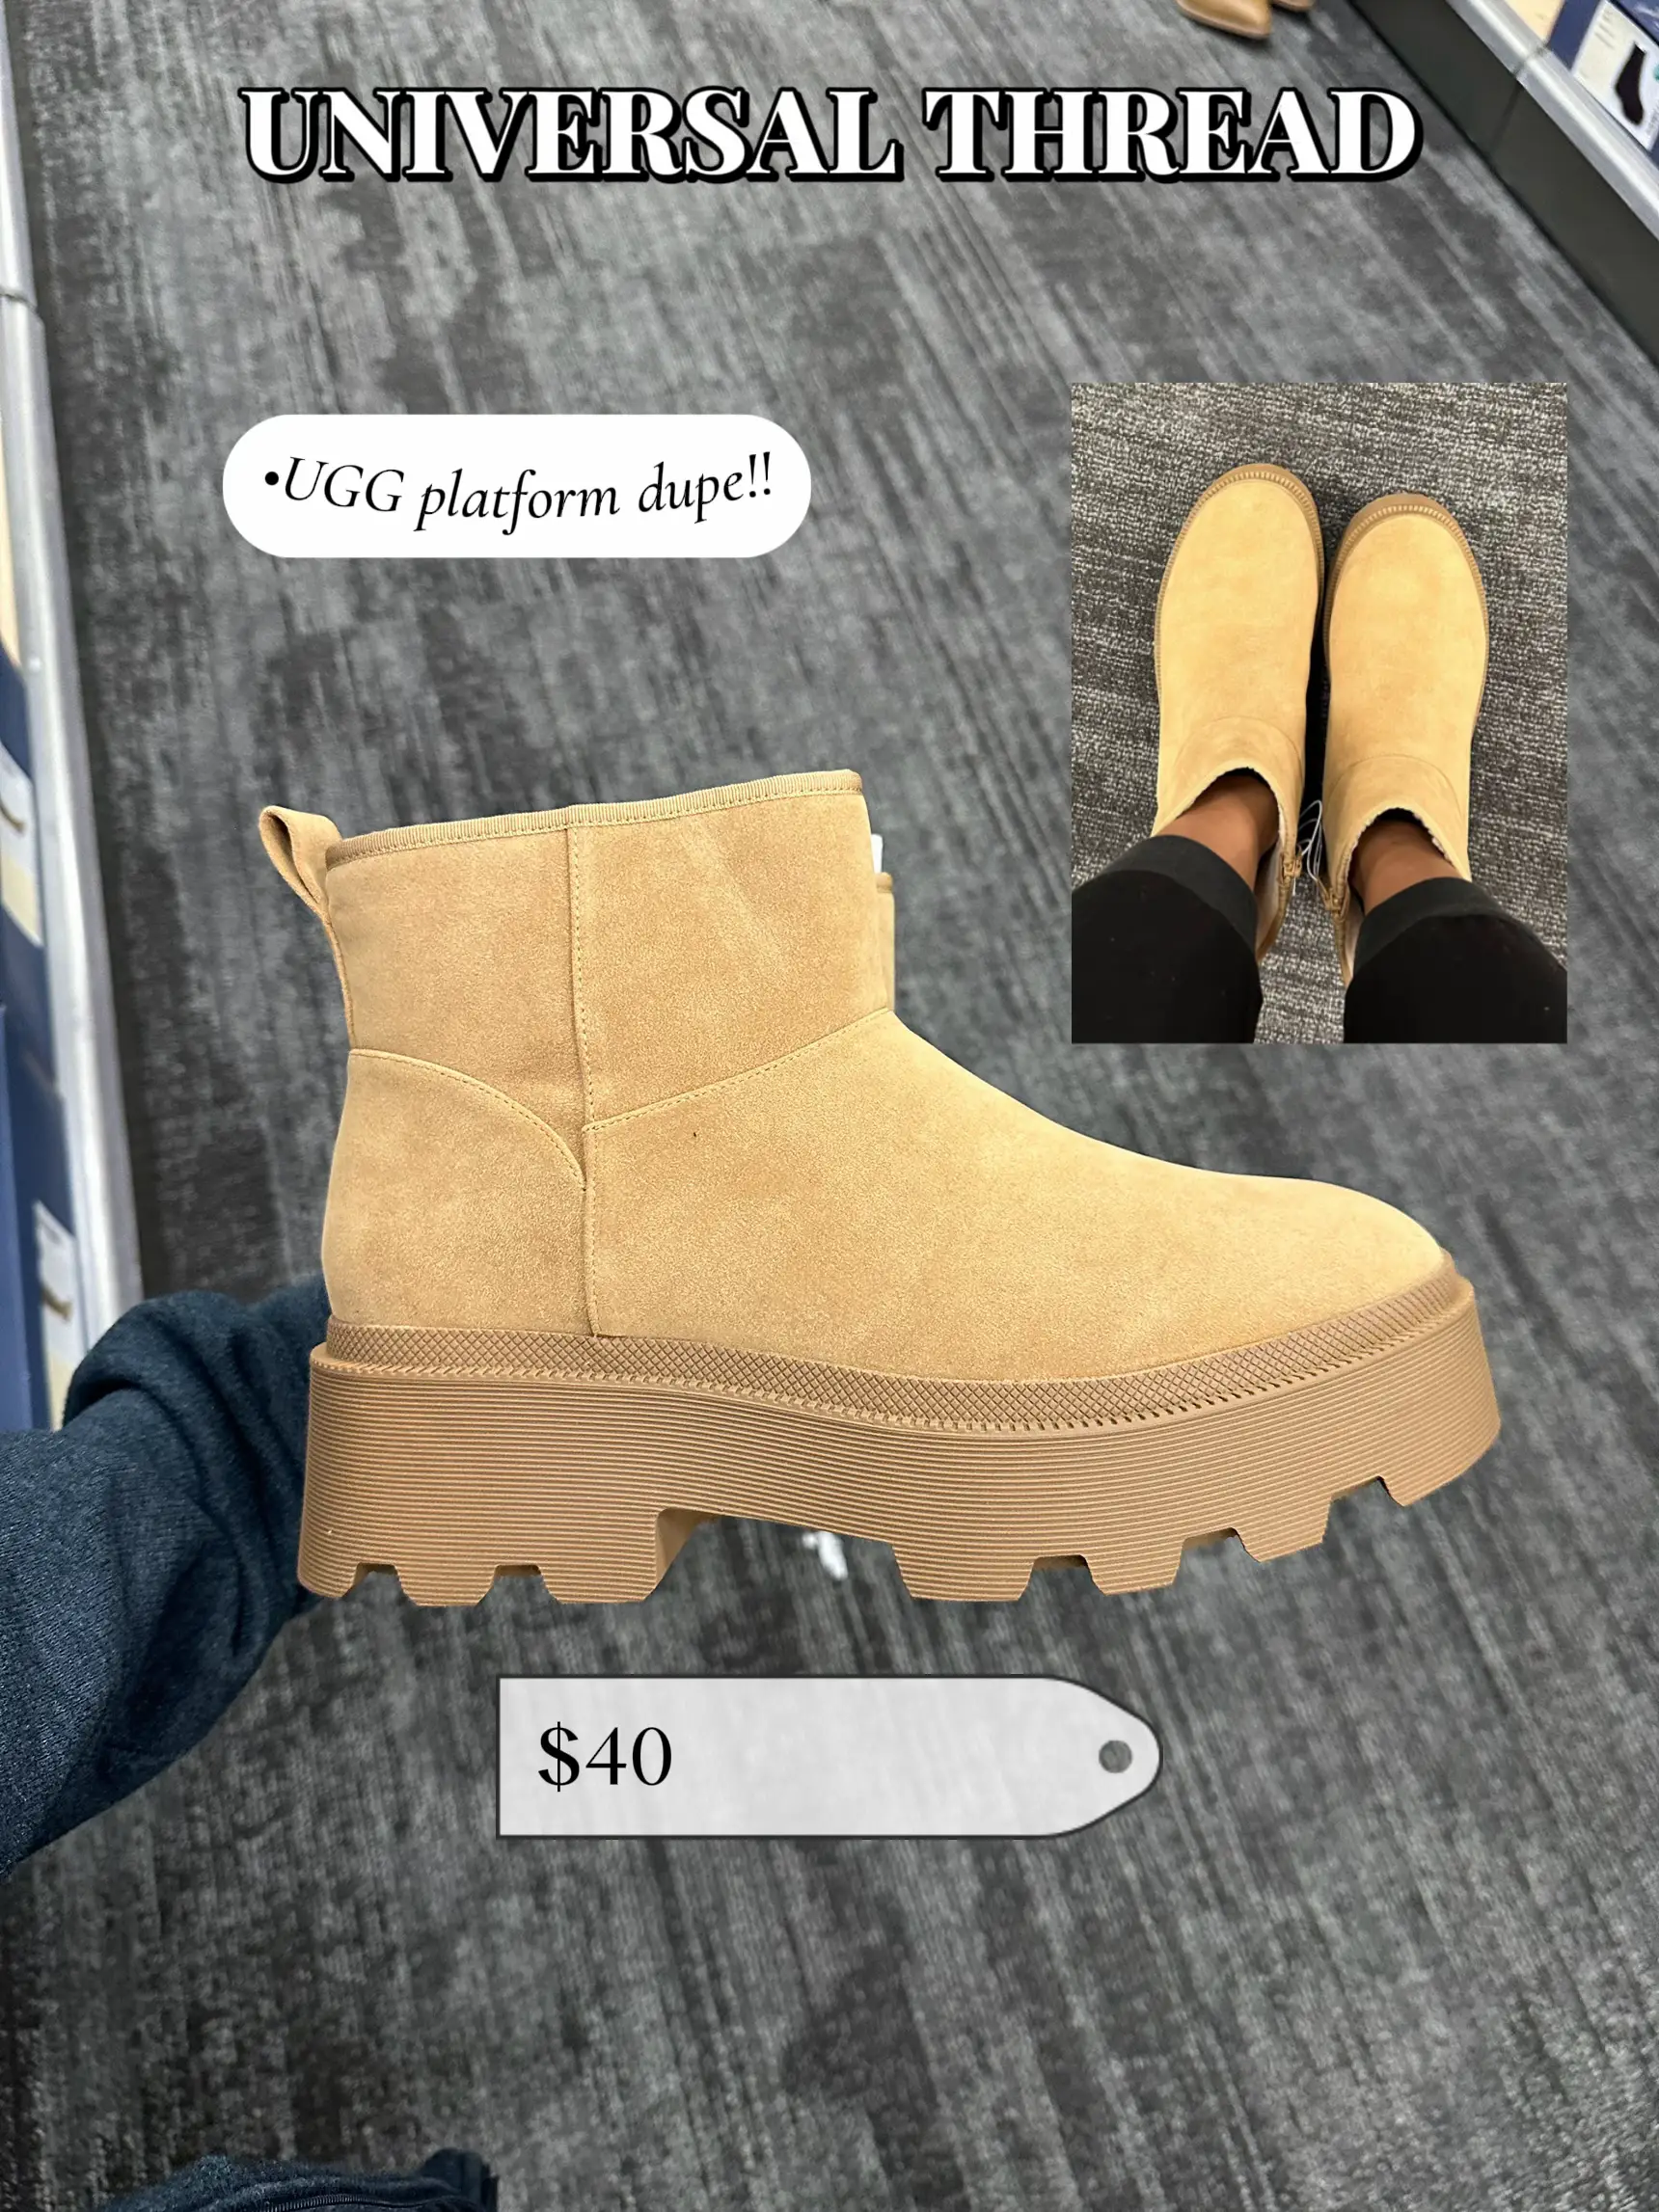  A pair of brown UGG platform dupe boots.